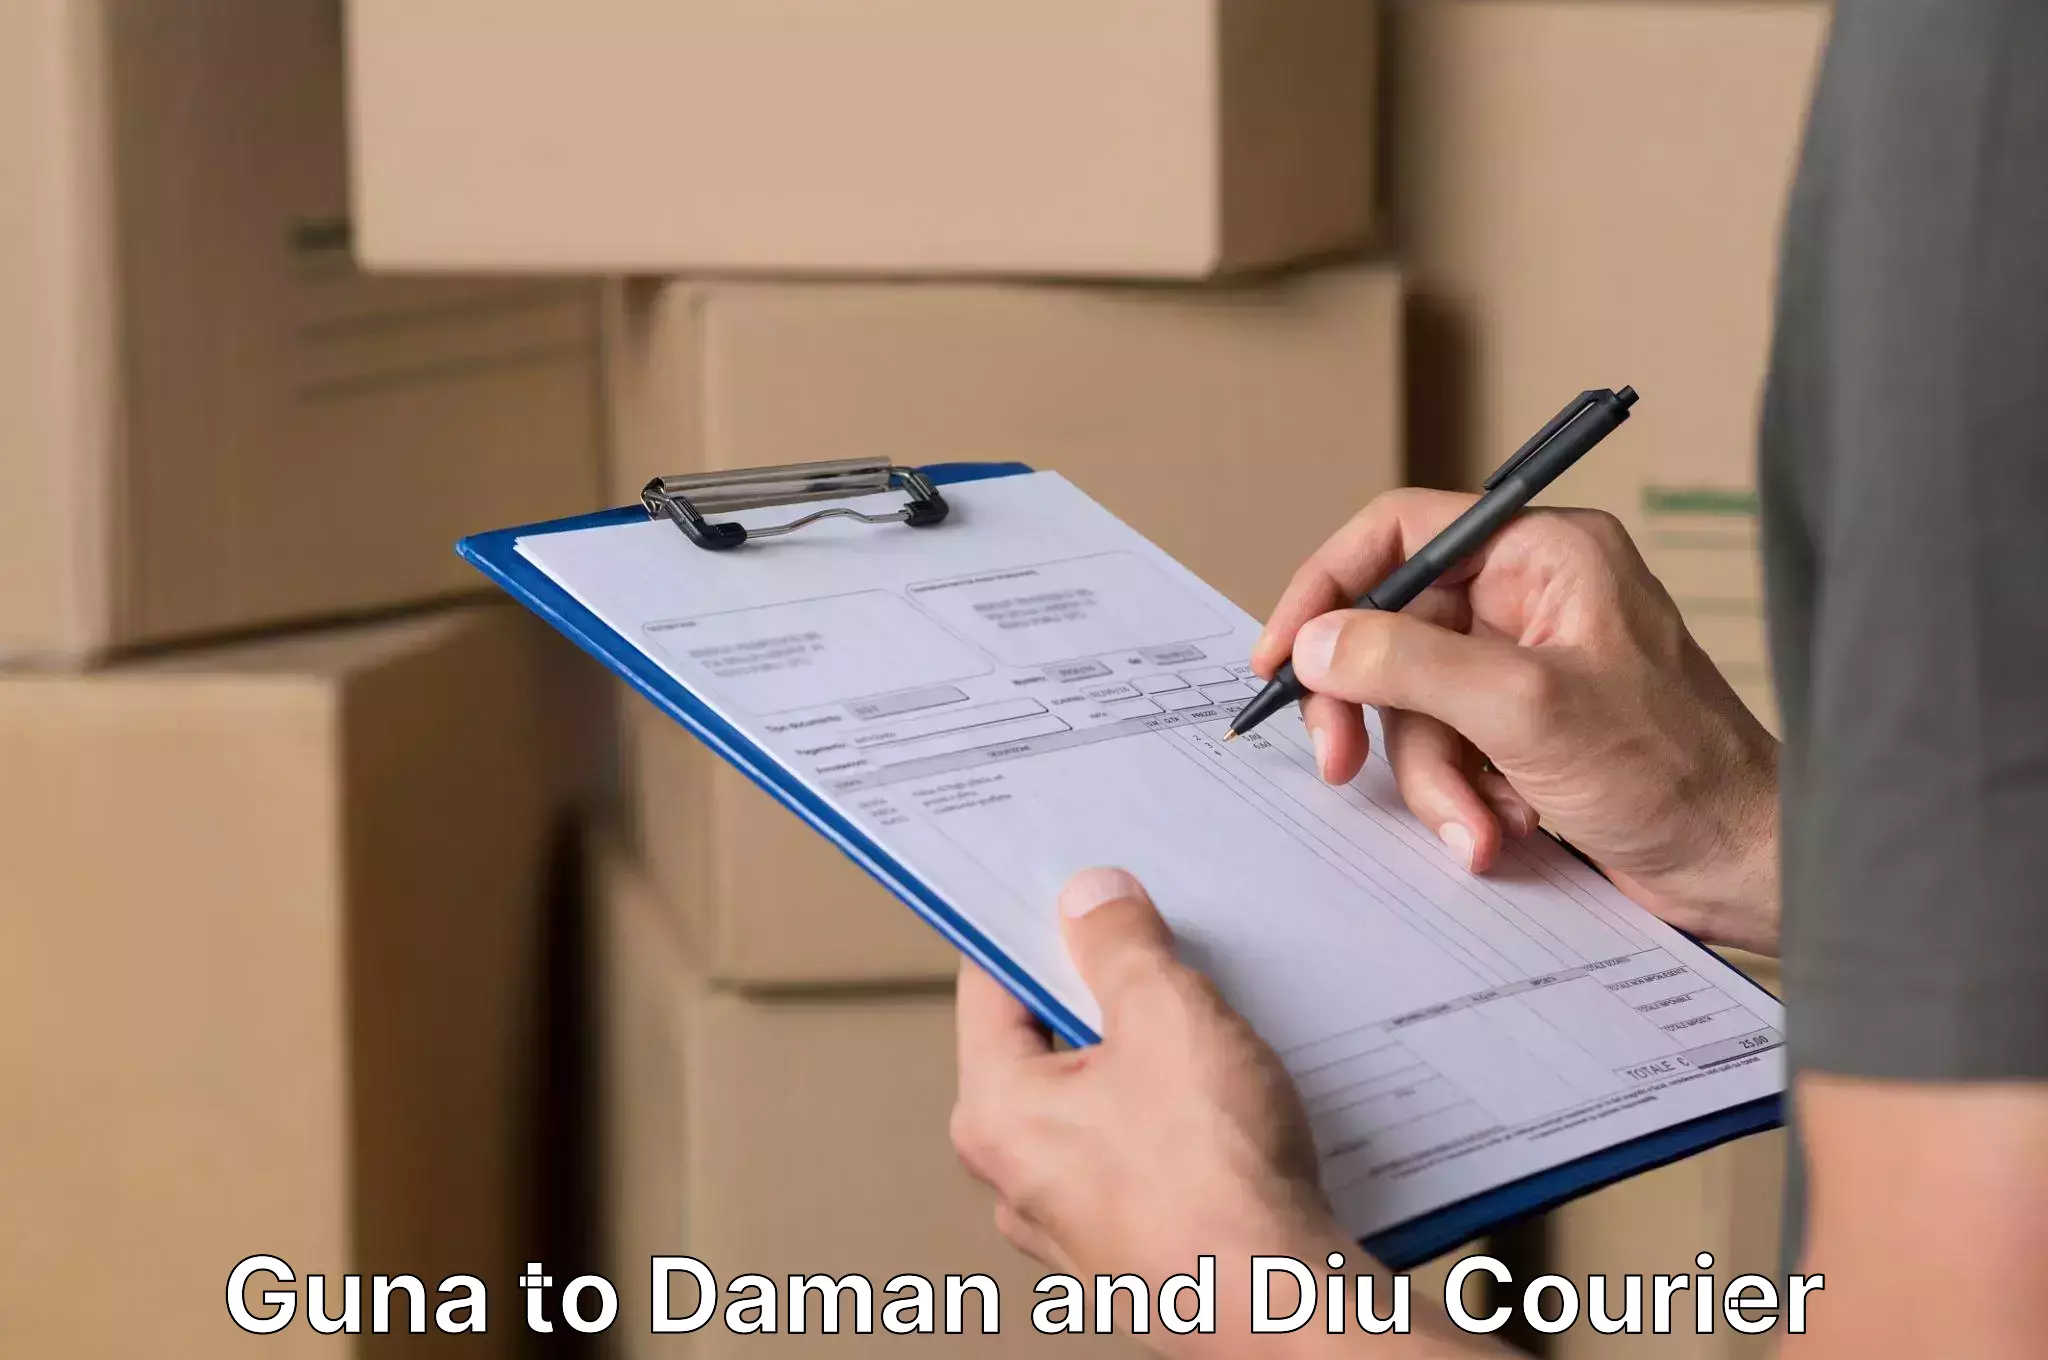 Trusted relocation experts Guna to Daman and Diu